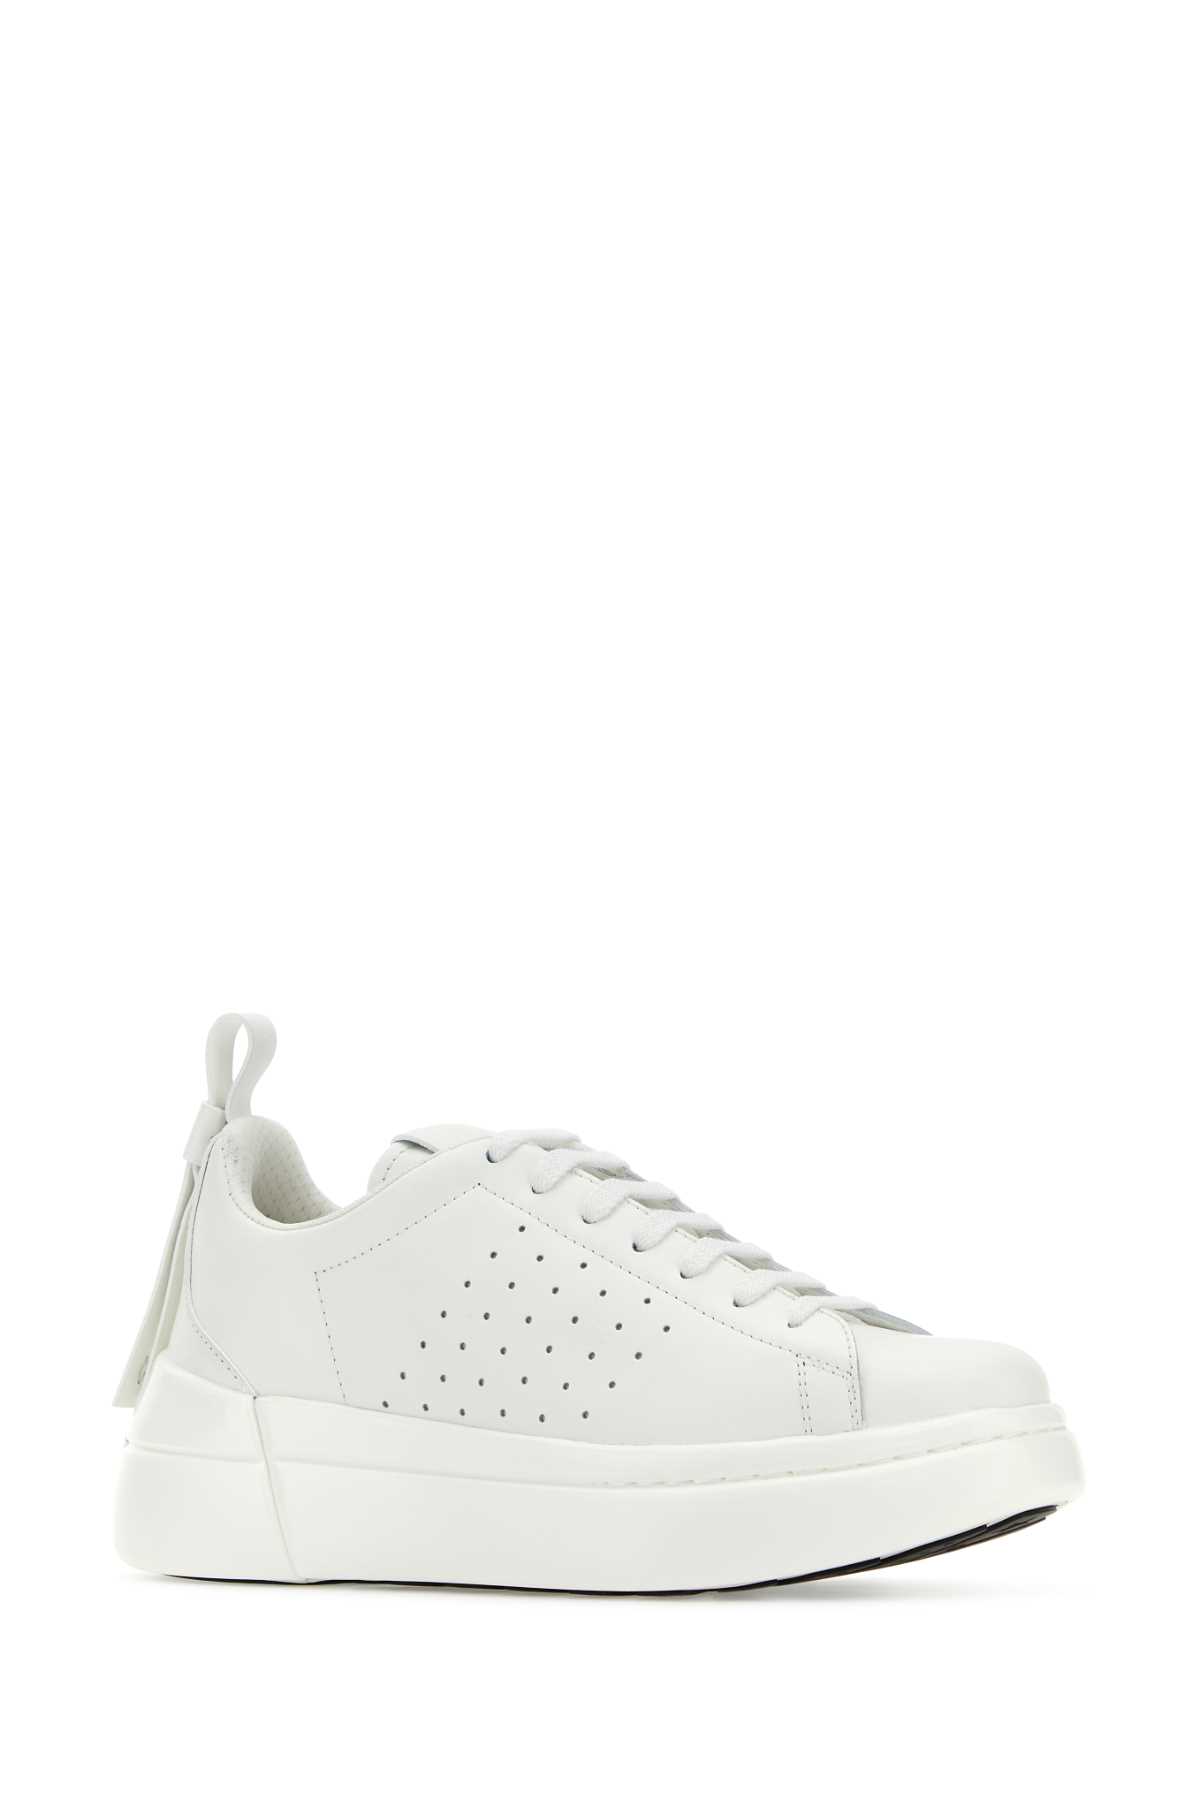 Red Valentino White Leather Bowalk Sneakers In Bianco